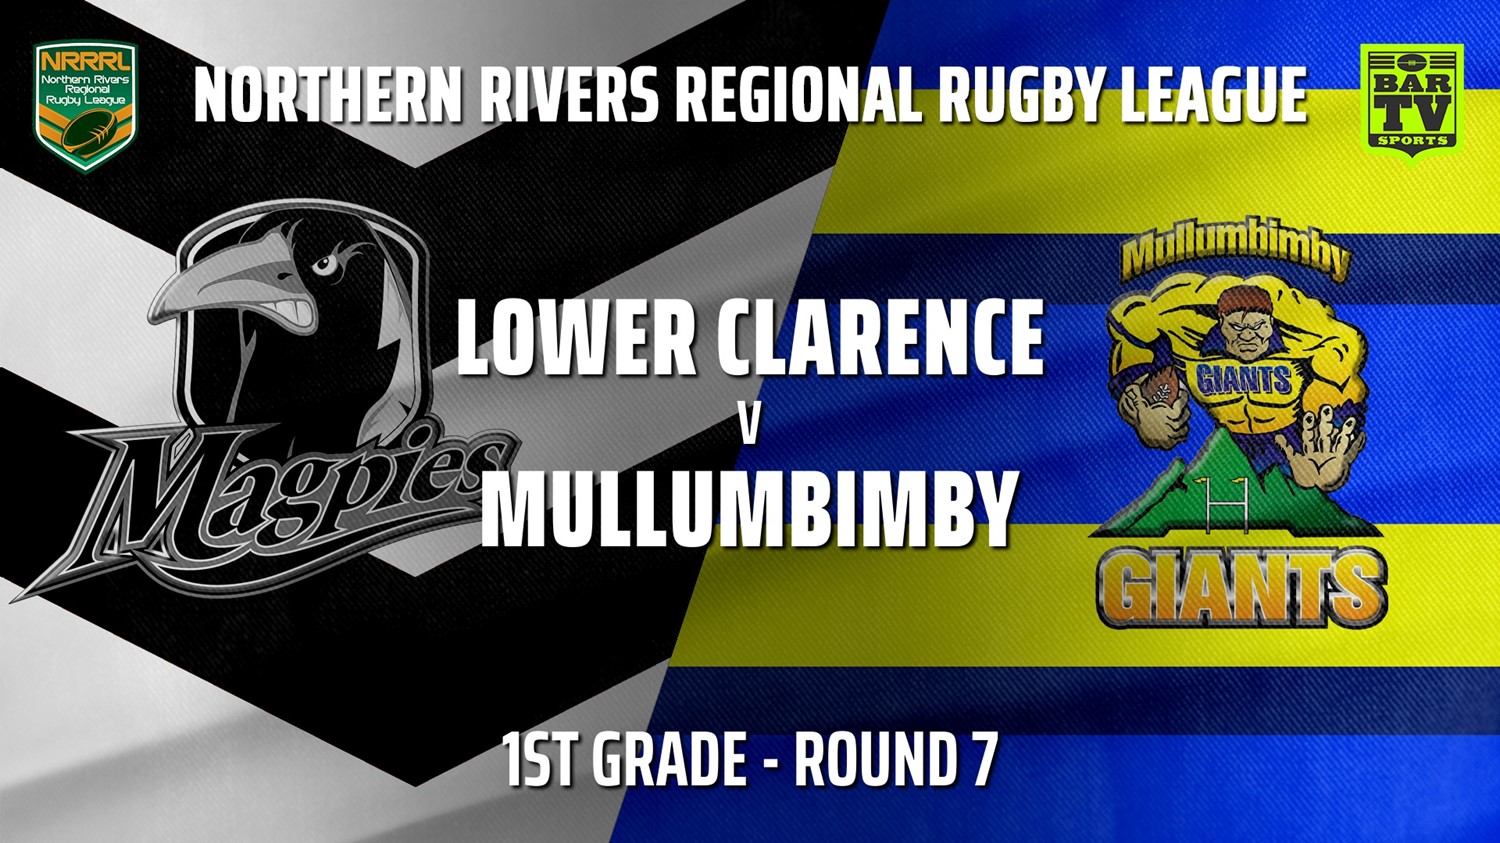 210620-Northern Rivers Round 7 - 1st Grade - Lower Clarence Magpies v Mullumbimby Giants Slate Image